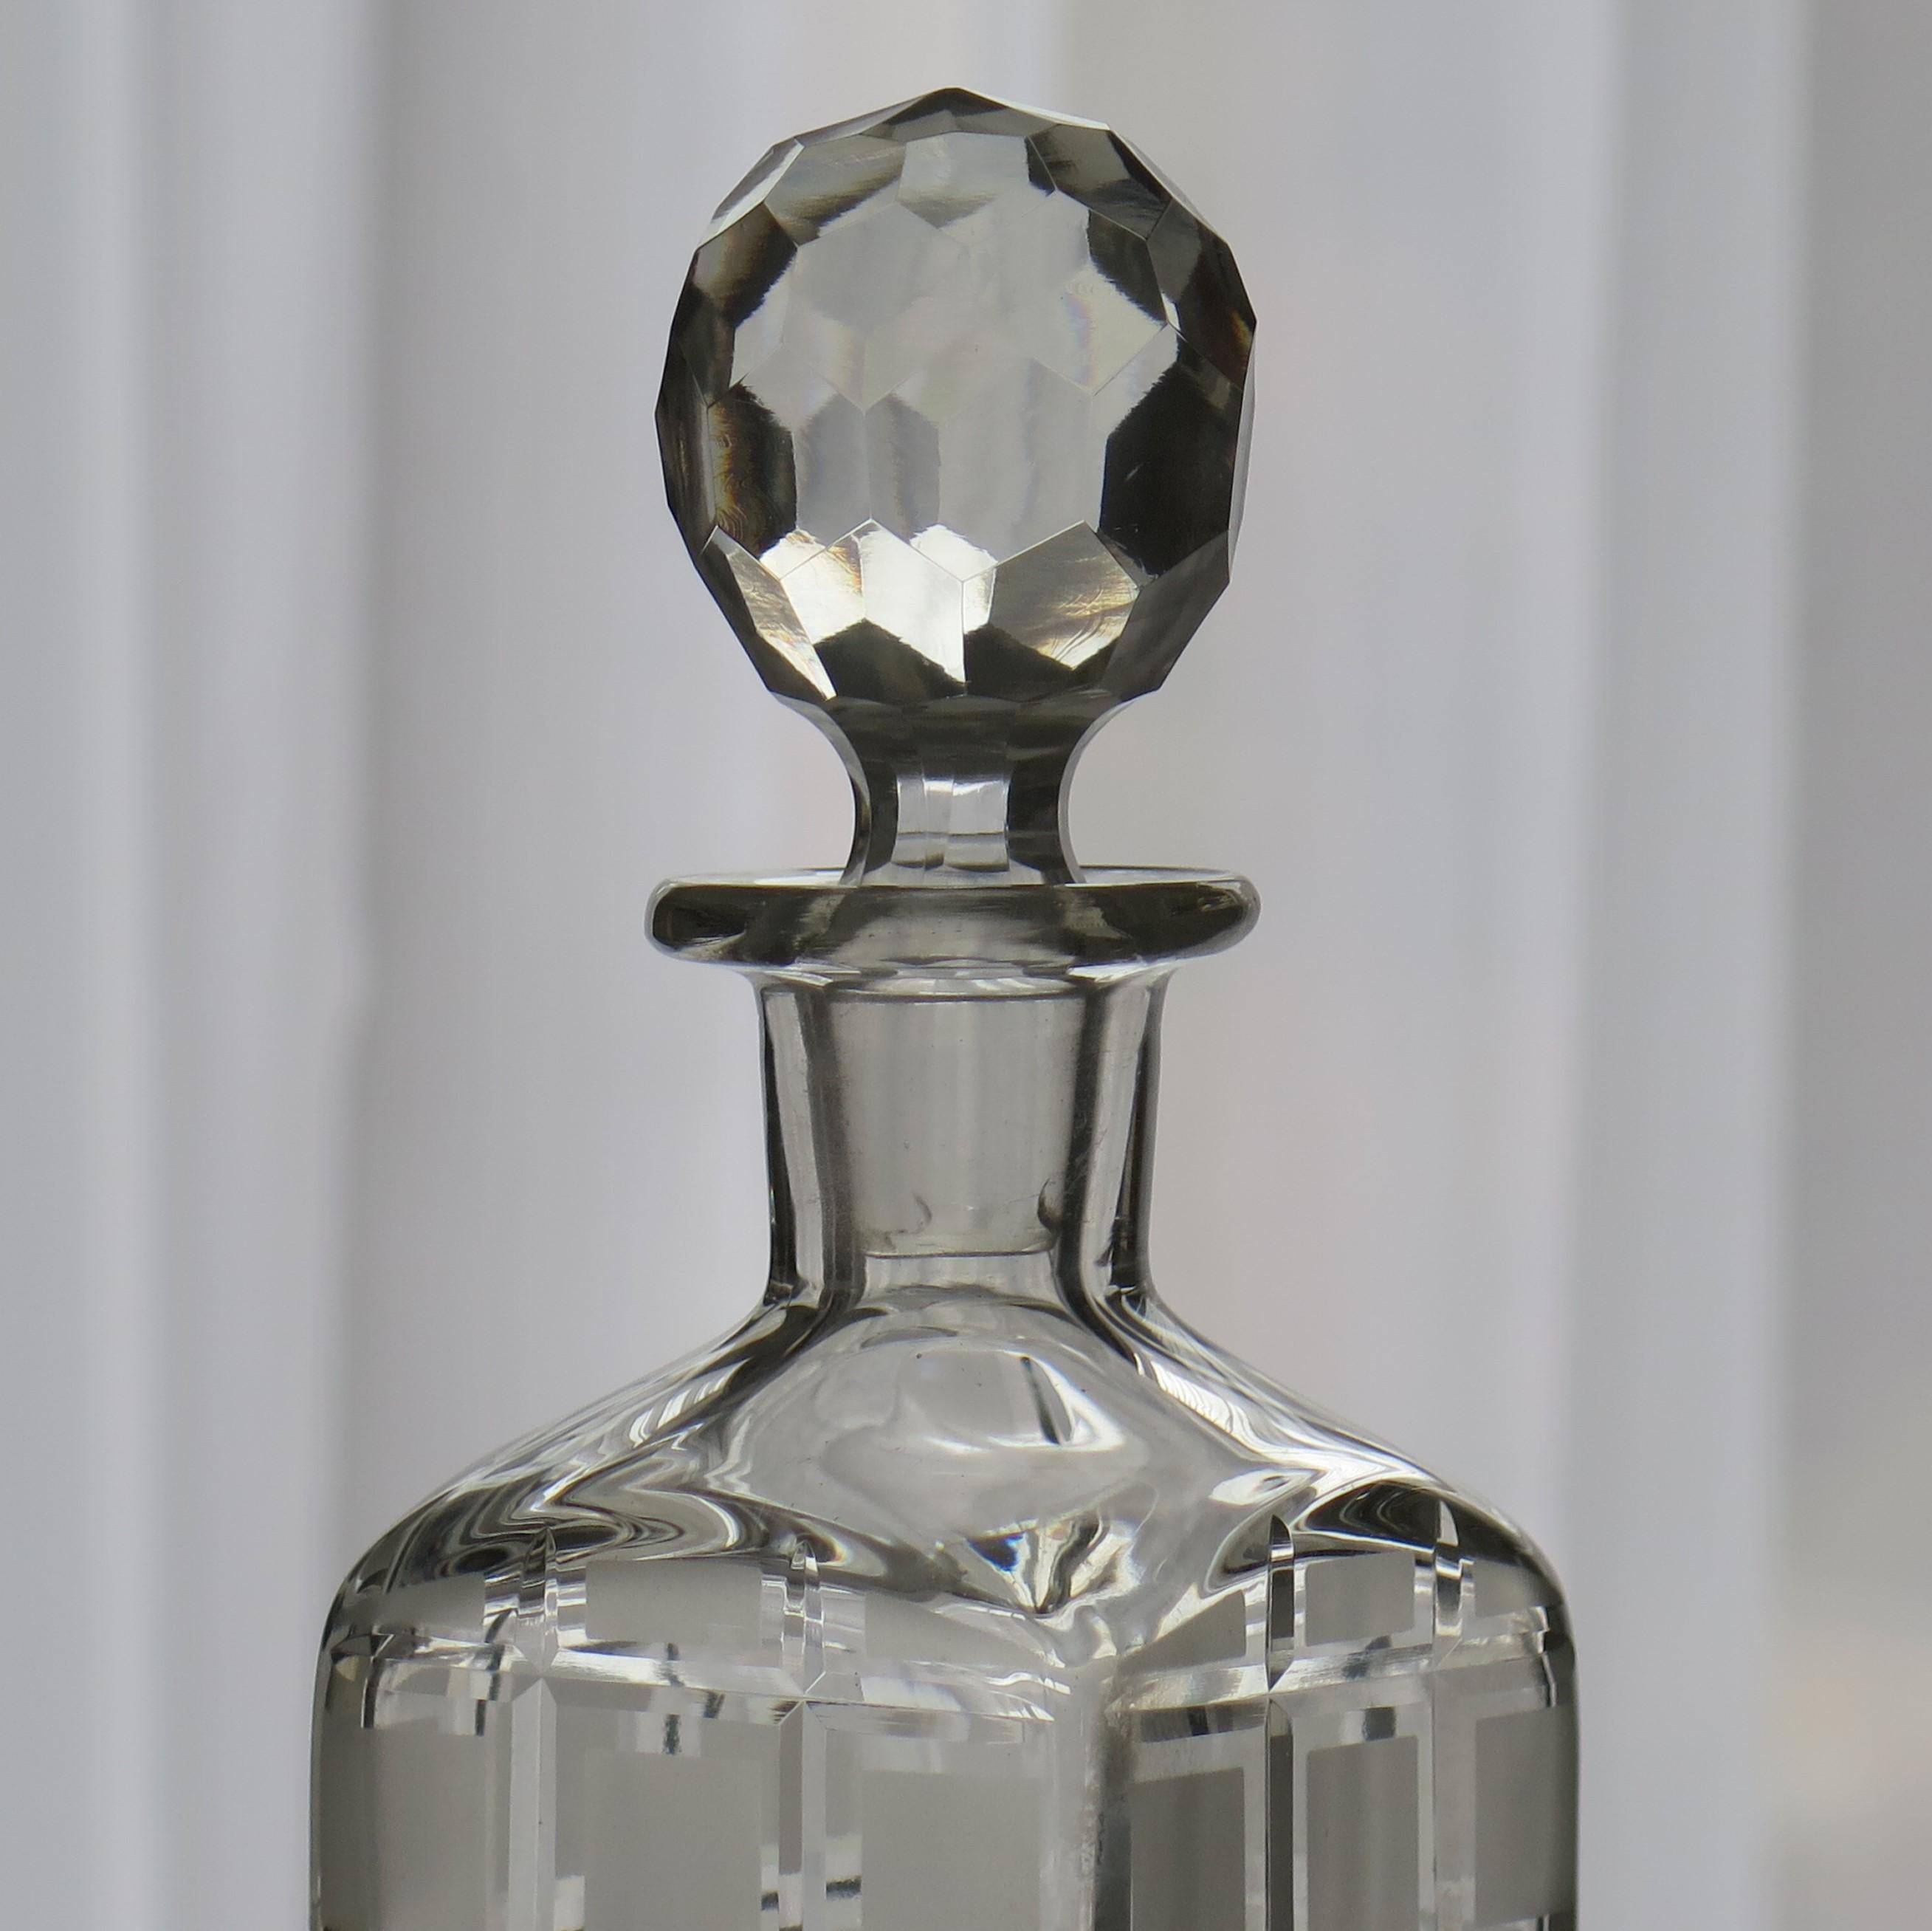 This is a good cut-glass crystal decanter or wine carafe, with a square shape having cut and etched decorative squares decoration and with a cut glass stopper, made of heavy lead glass, and dating to Edwardian England, circa 1900.

This decanter